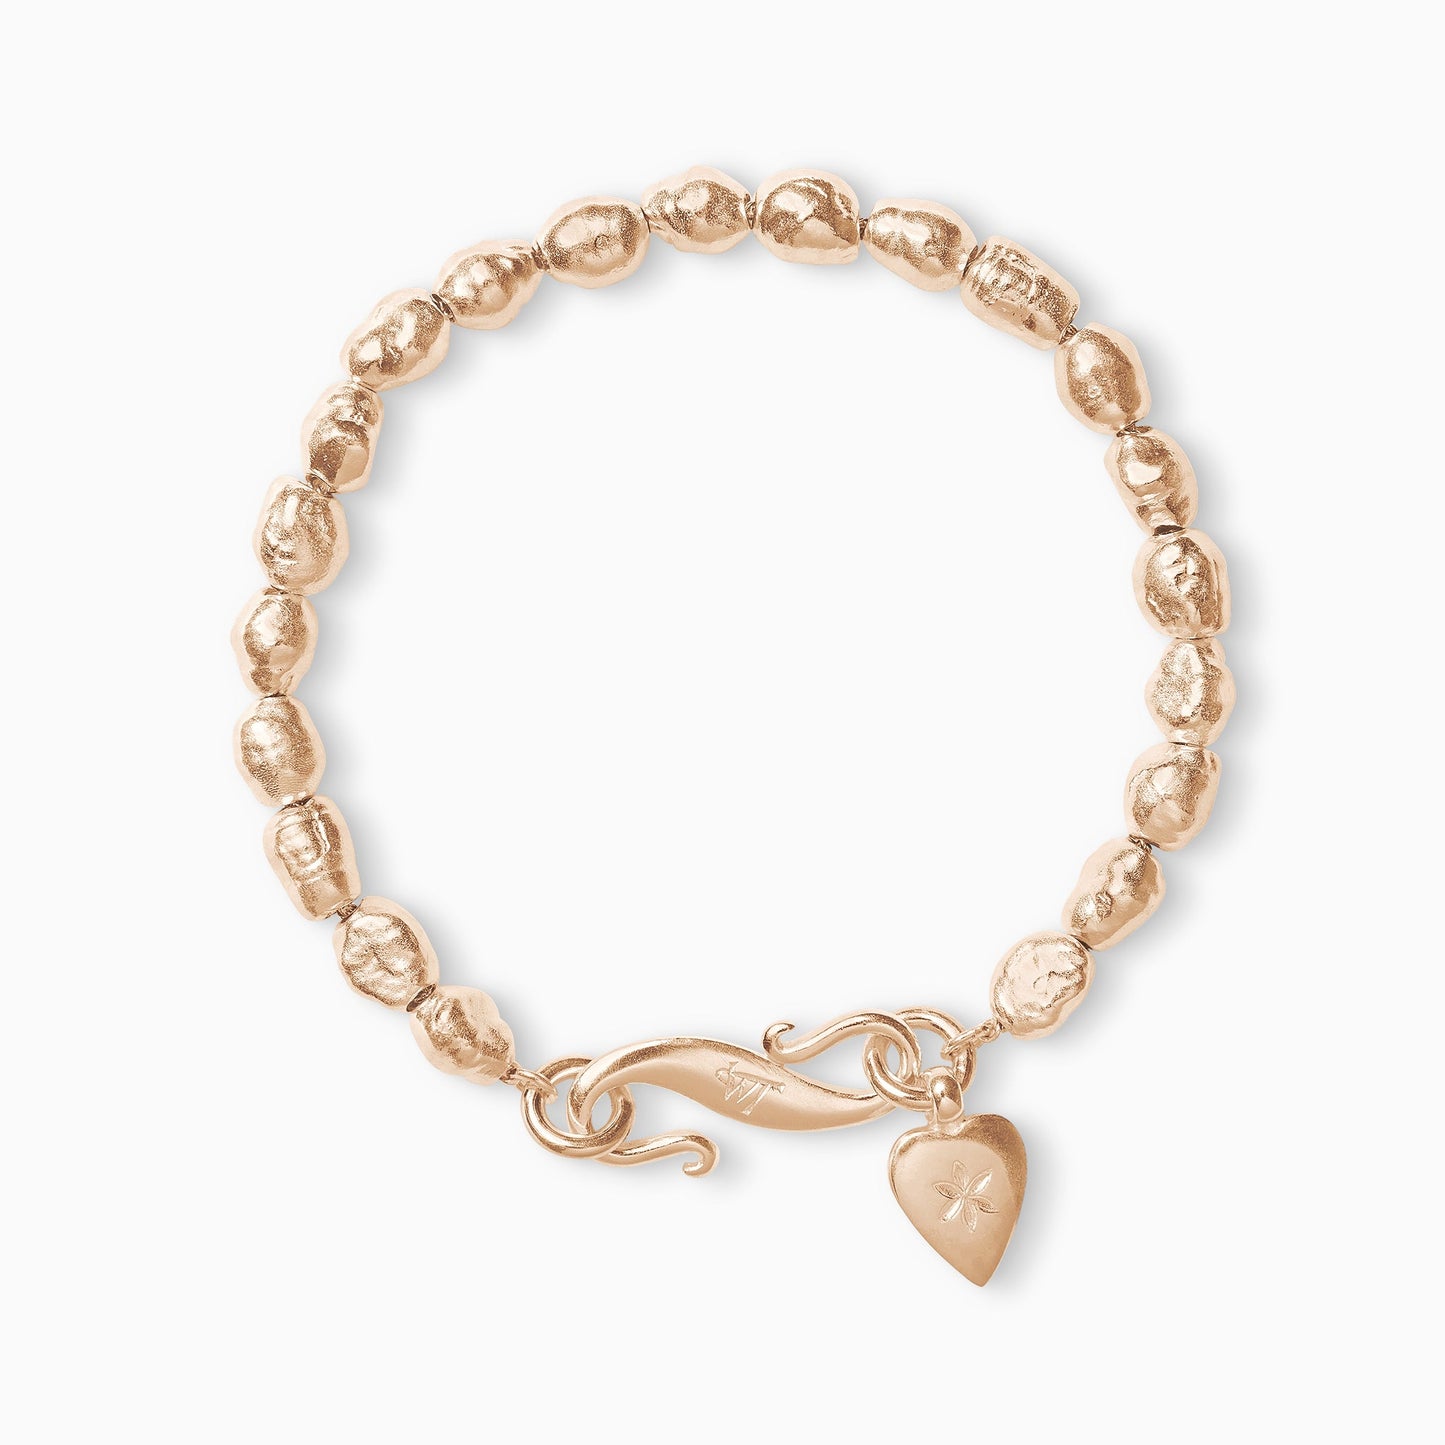 An 18ct Fairtrade rose gold bracelet of handmade irregular pearl shaped textured beads with a smooth heart shaped charm engraved with a 6 petal flower and our signature ’S’ clasp. Bracelet length 190mm. Beads varying approximately 8mm x 6mm.